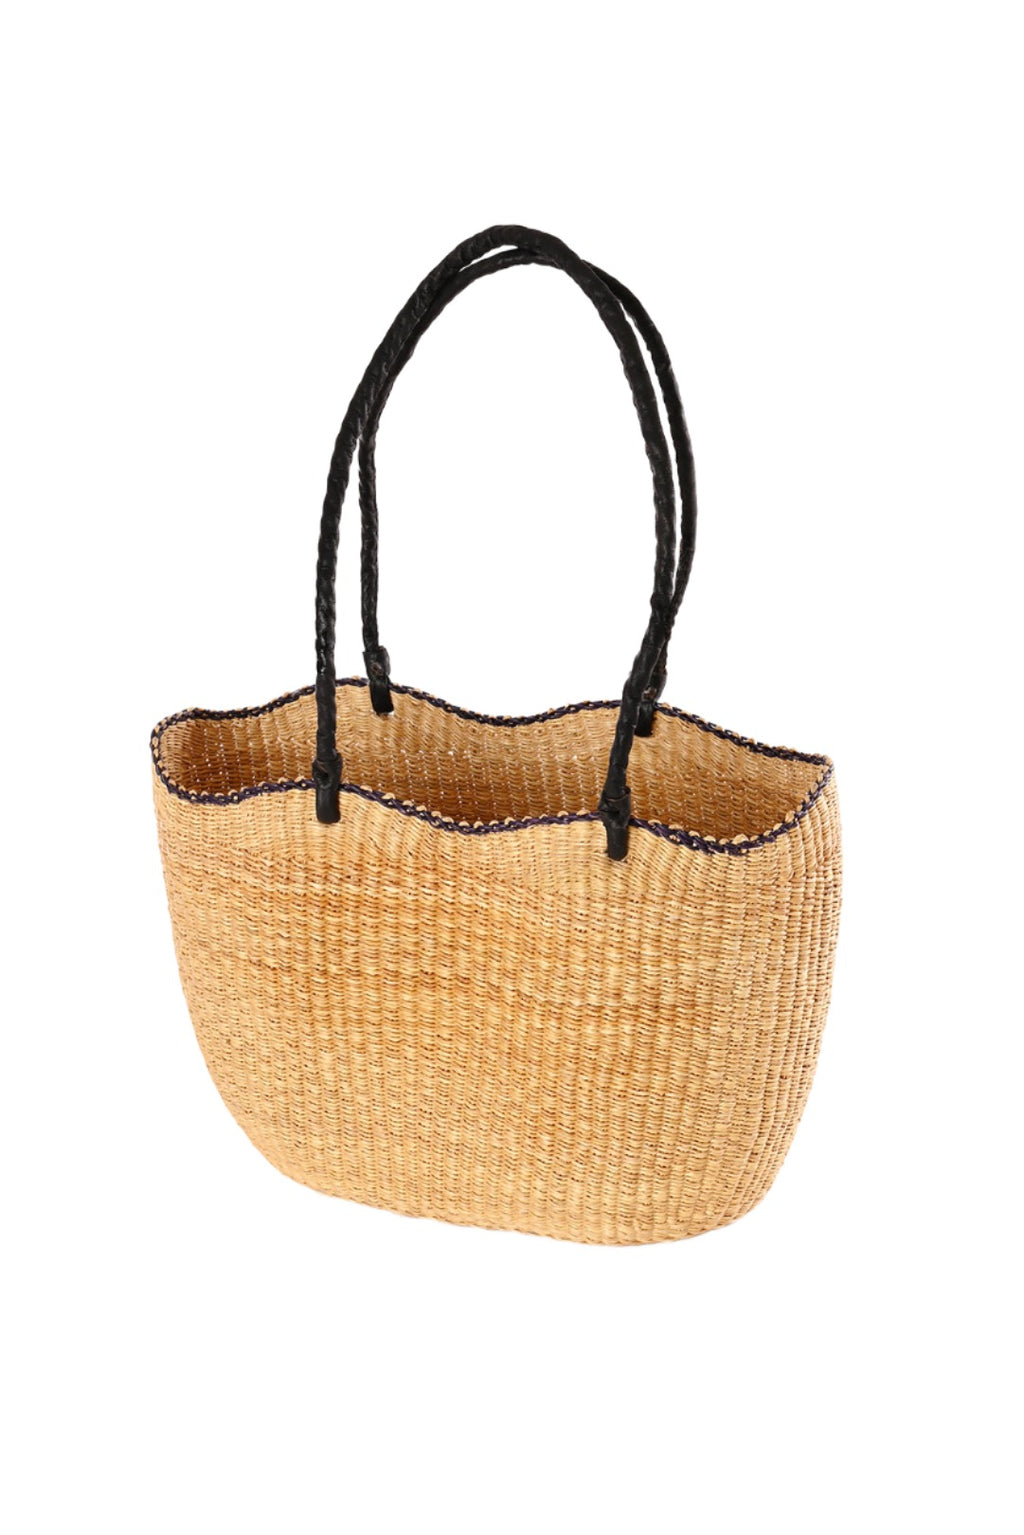 Scalloped Grass Tote with Black Edge Detail